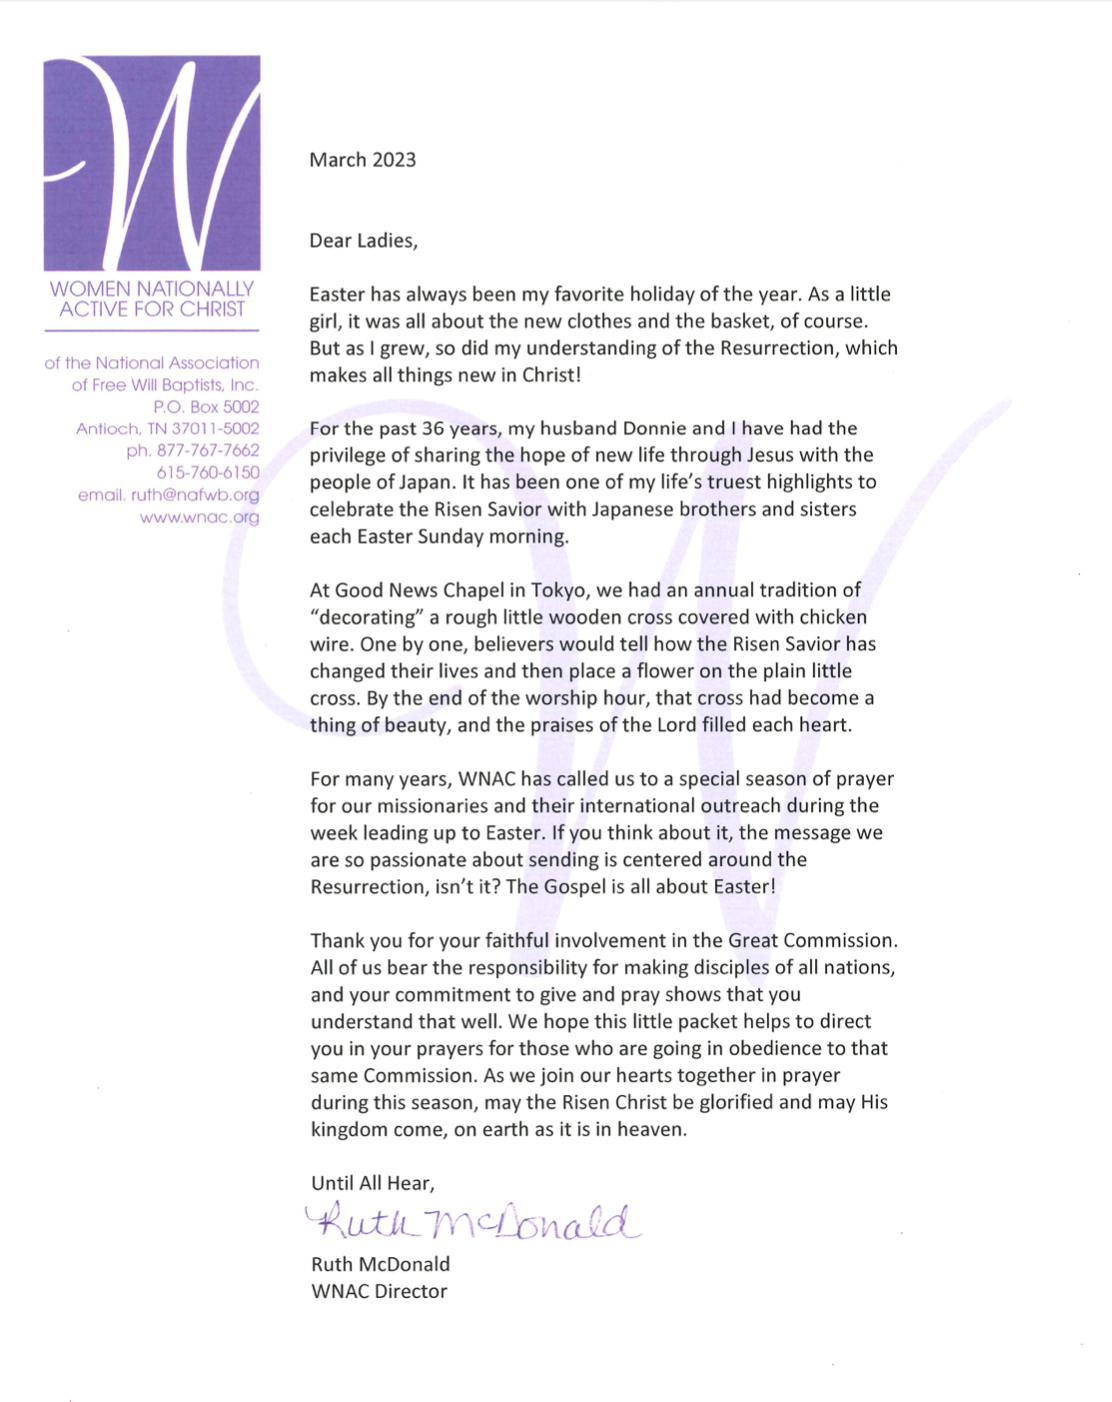 Ruth WNAC Pre-easter letter 2023